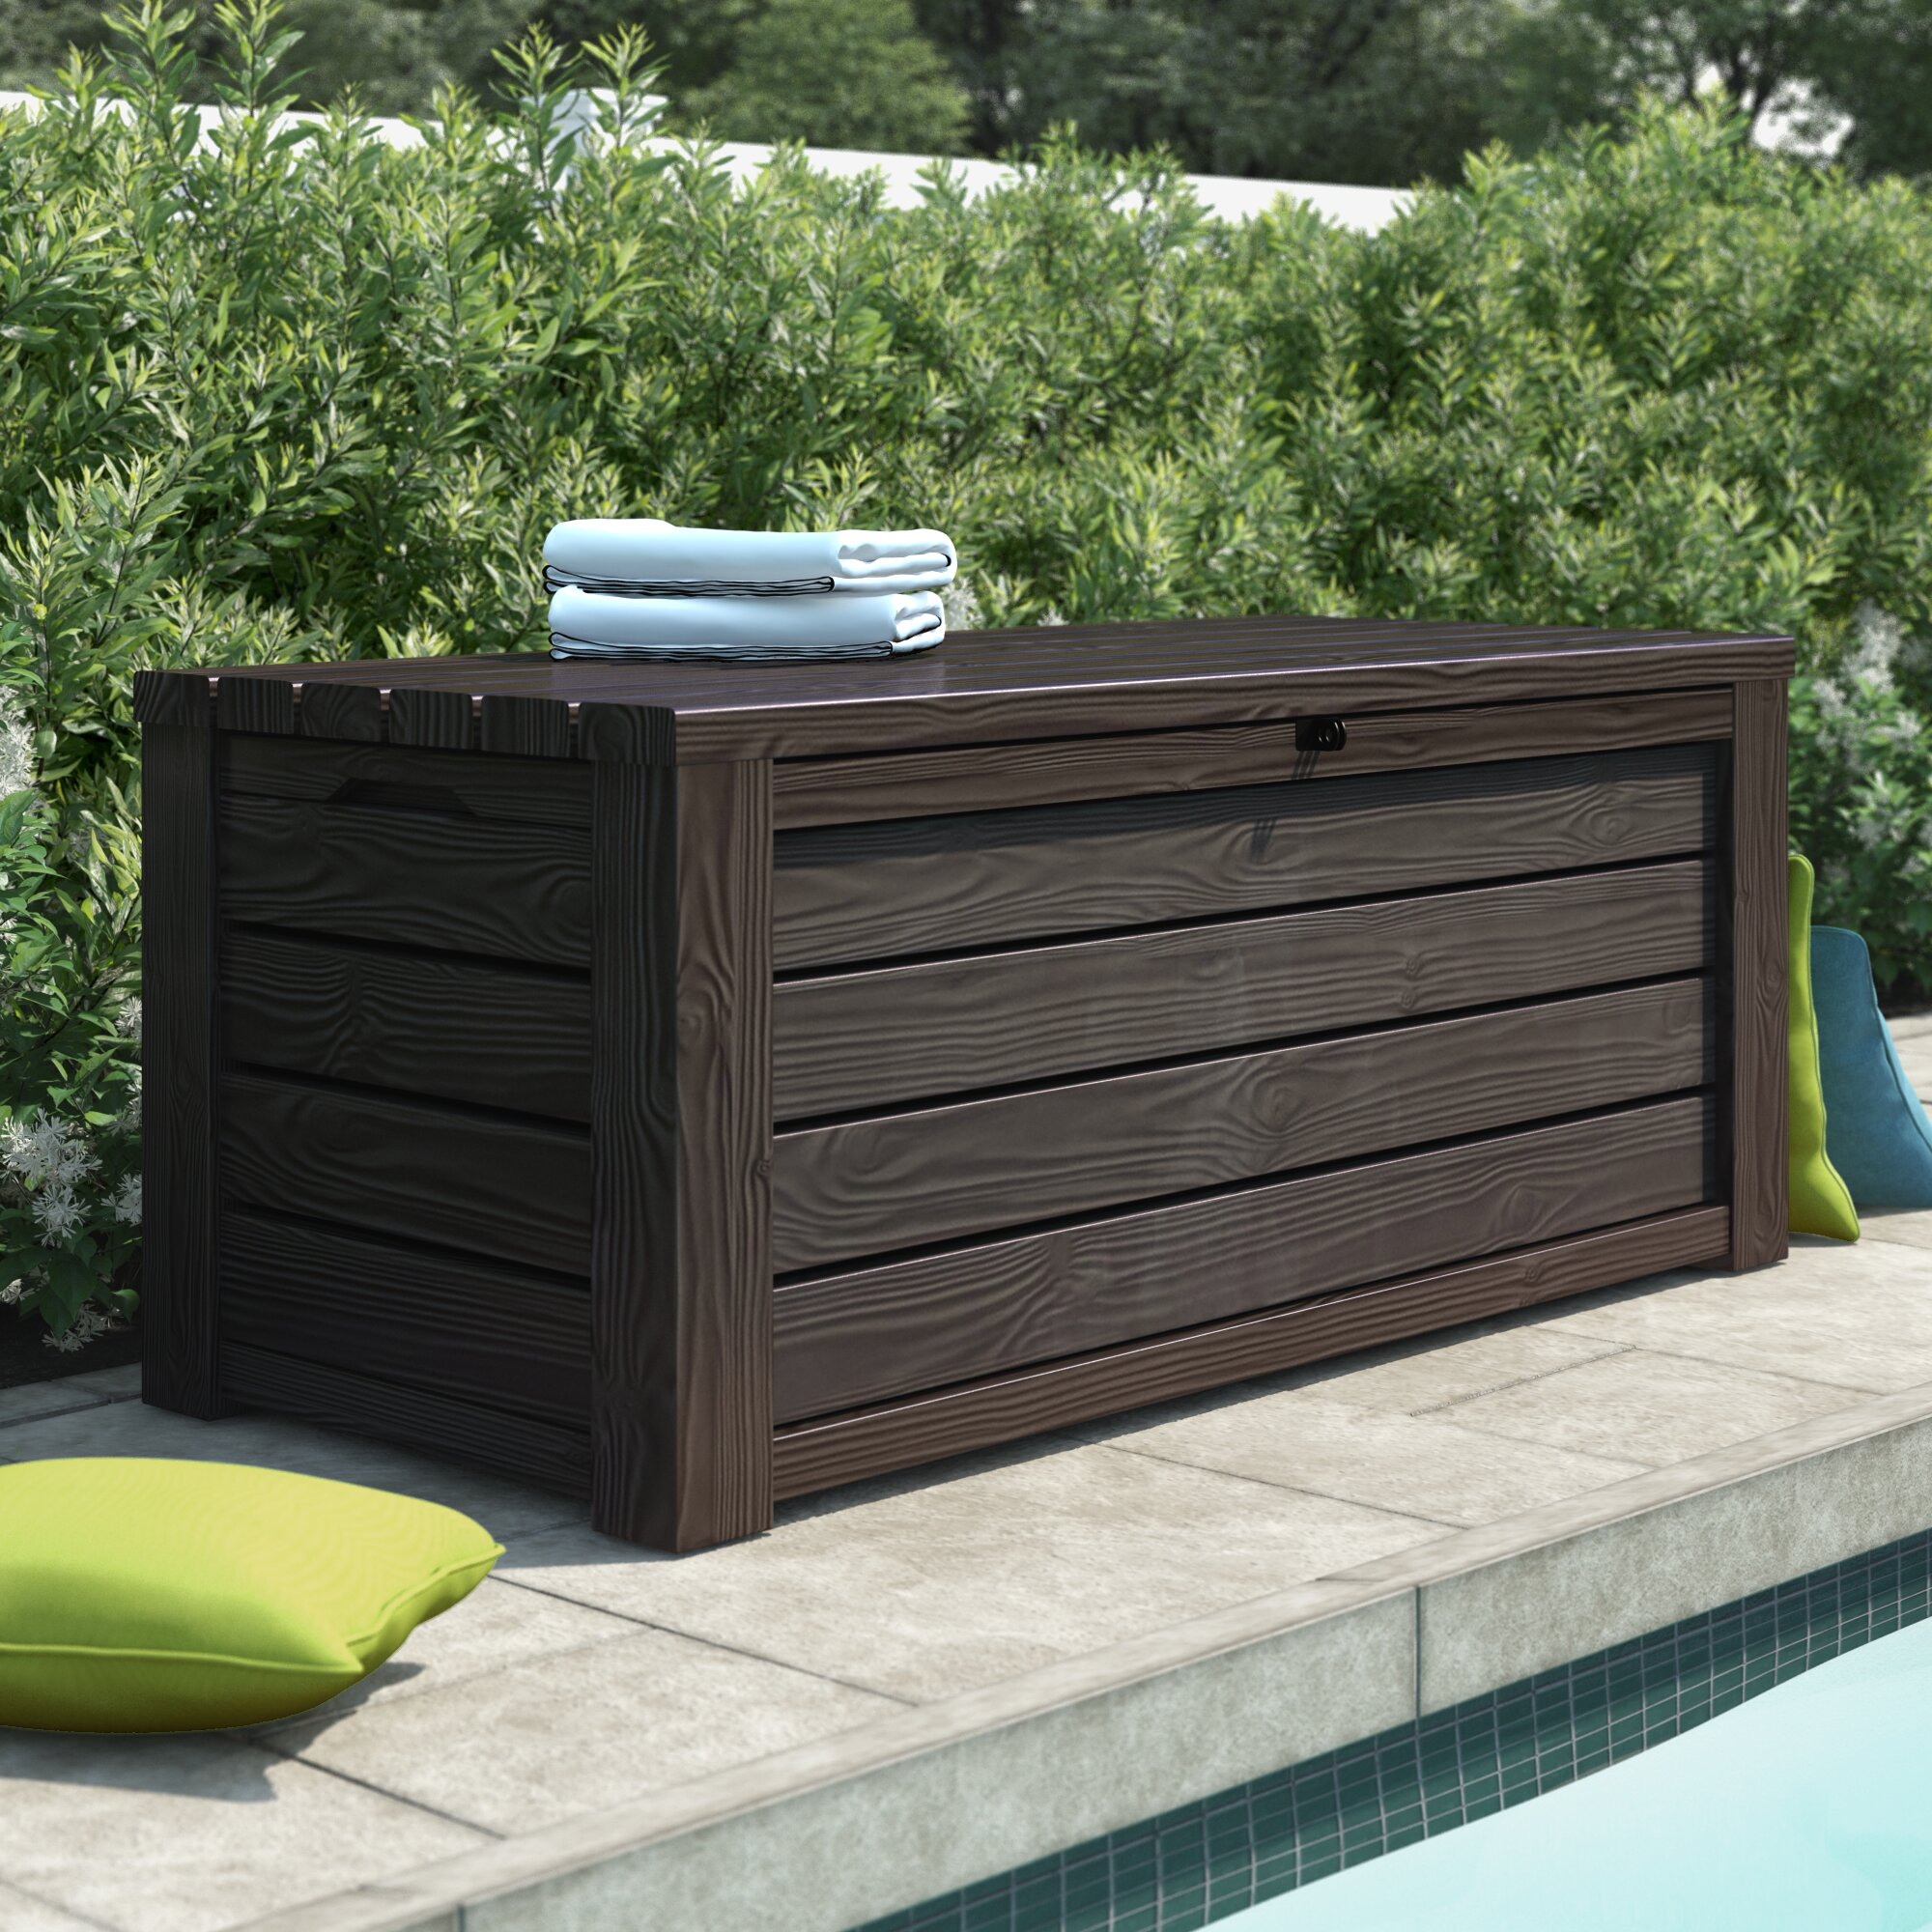 Patio Cubby Storage Chest with Lockable Lid & Built-in Handles Giantex 30 Gallon Deck Box Weather Resistant Organization Container for Pool Garden Black Wood Grain Texture Outdoor Storage Bin 